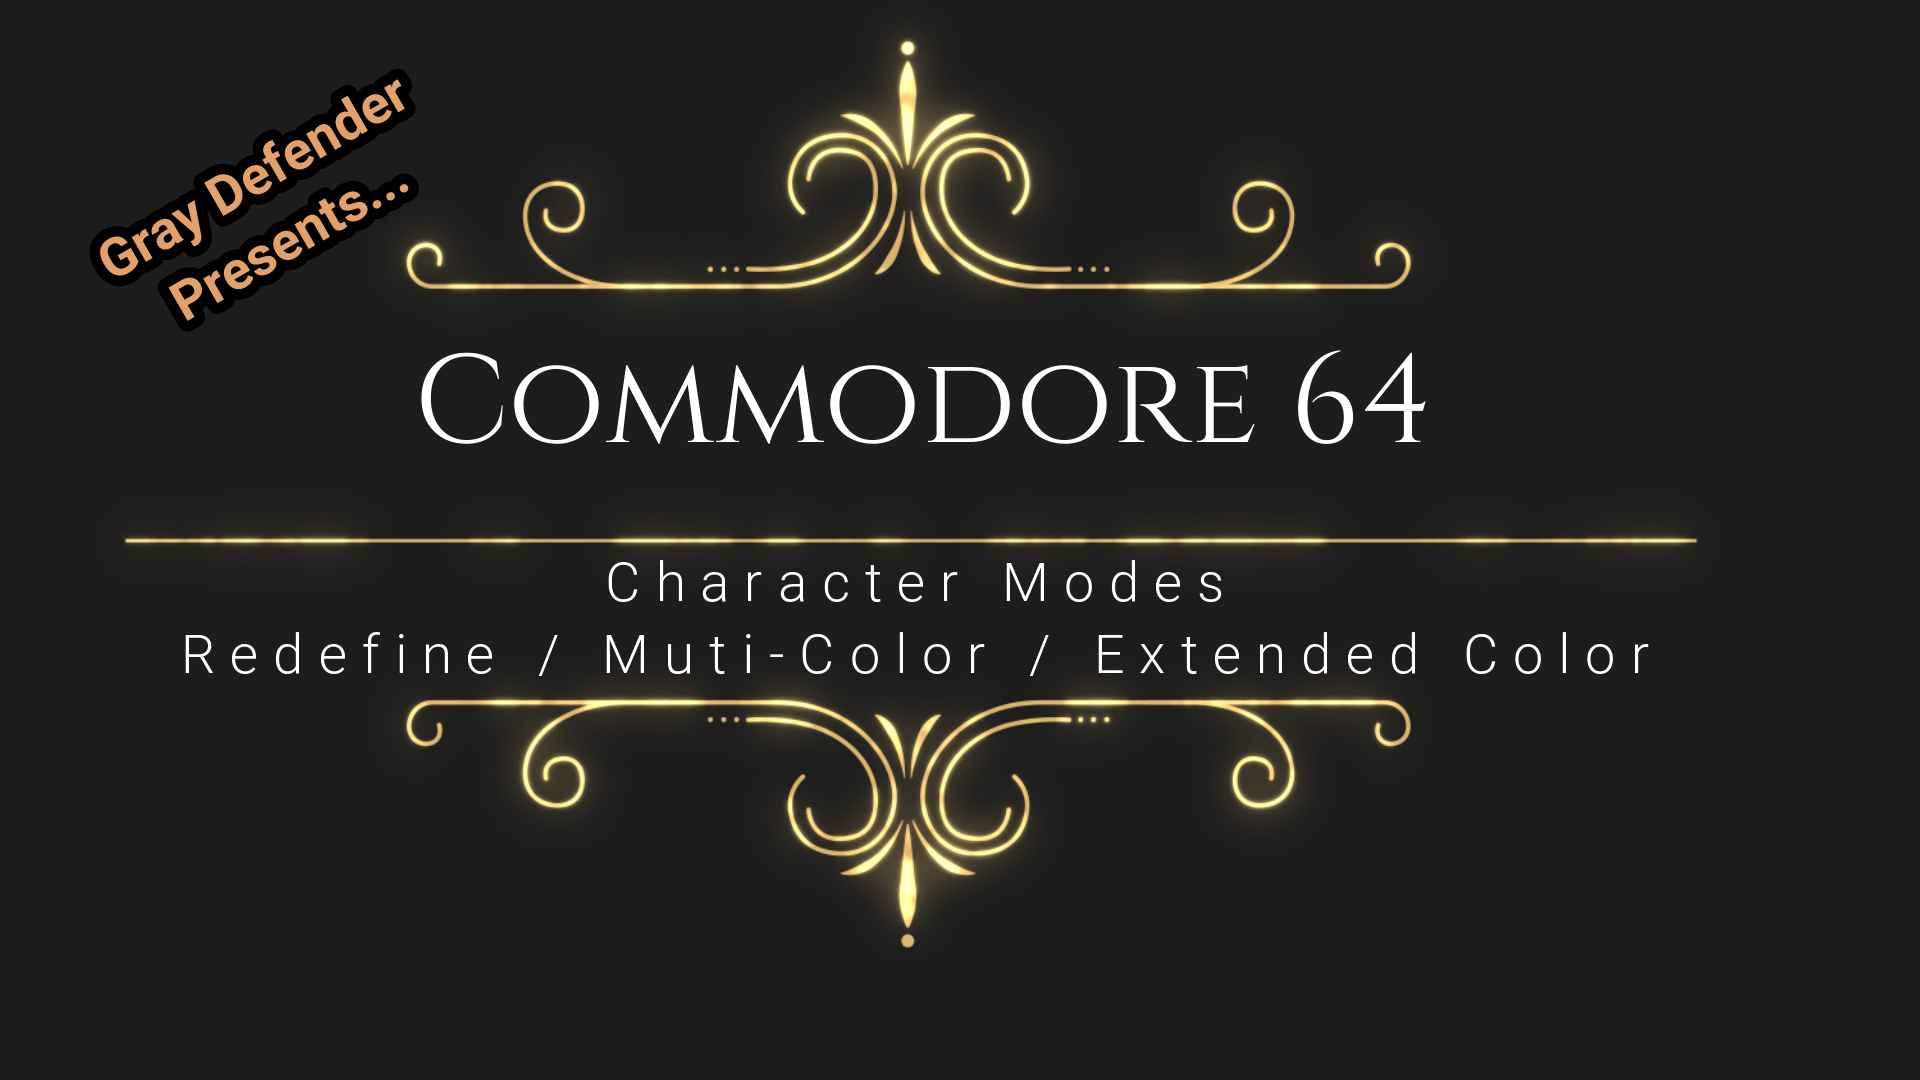 C64 Character Modes, Redefine / Muti-Color / Extended Color